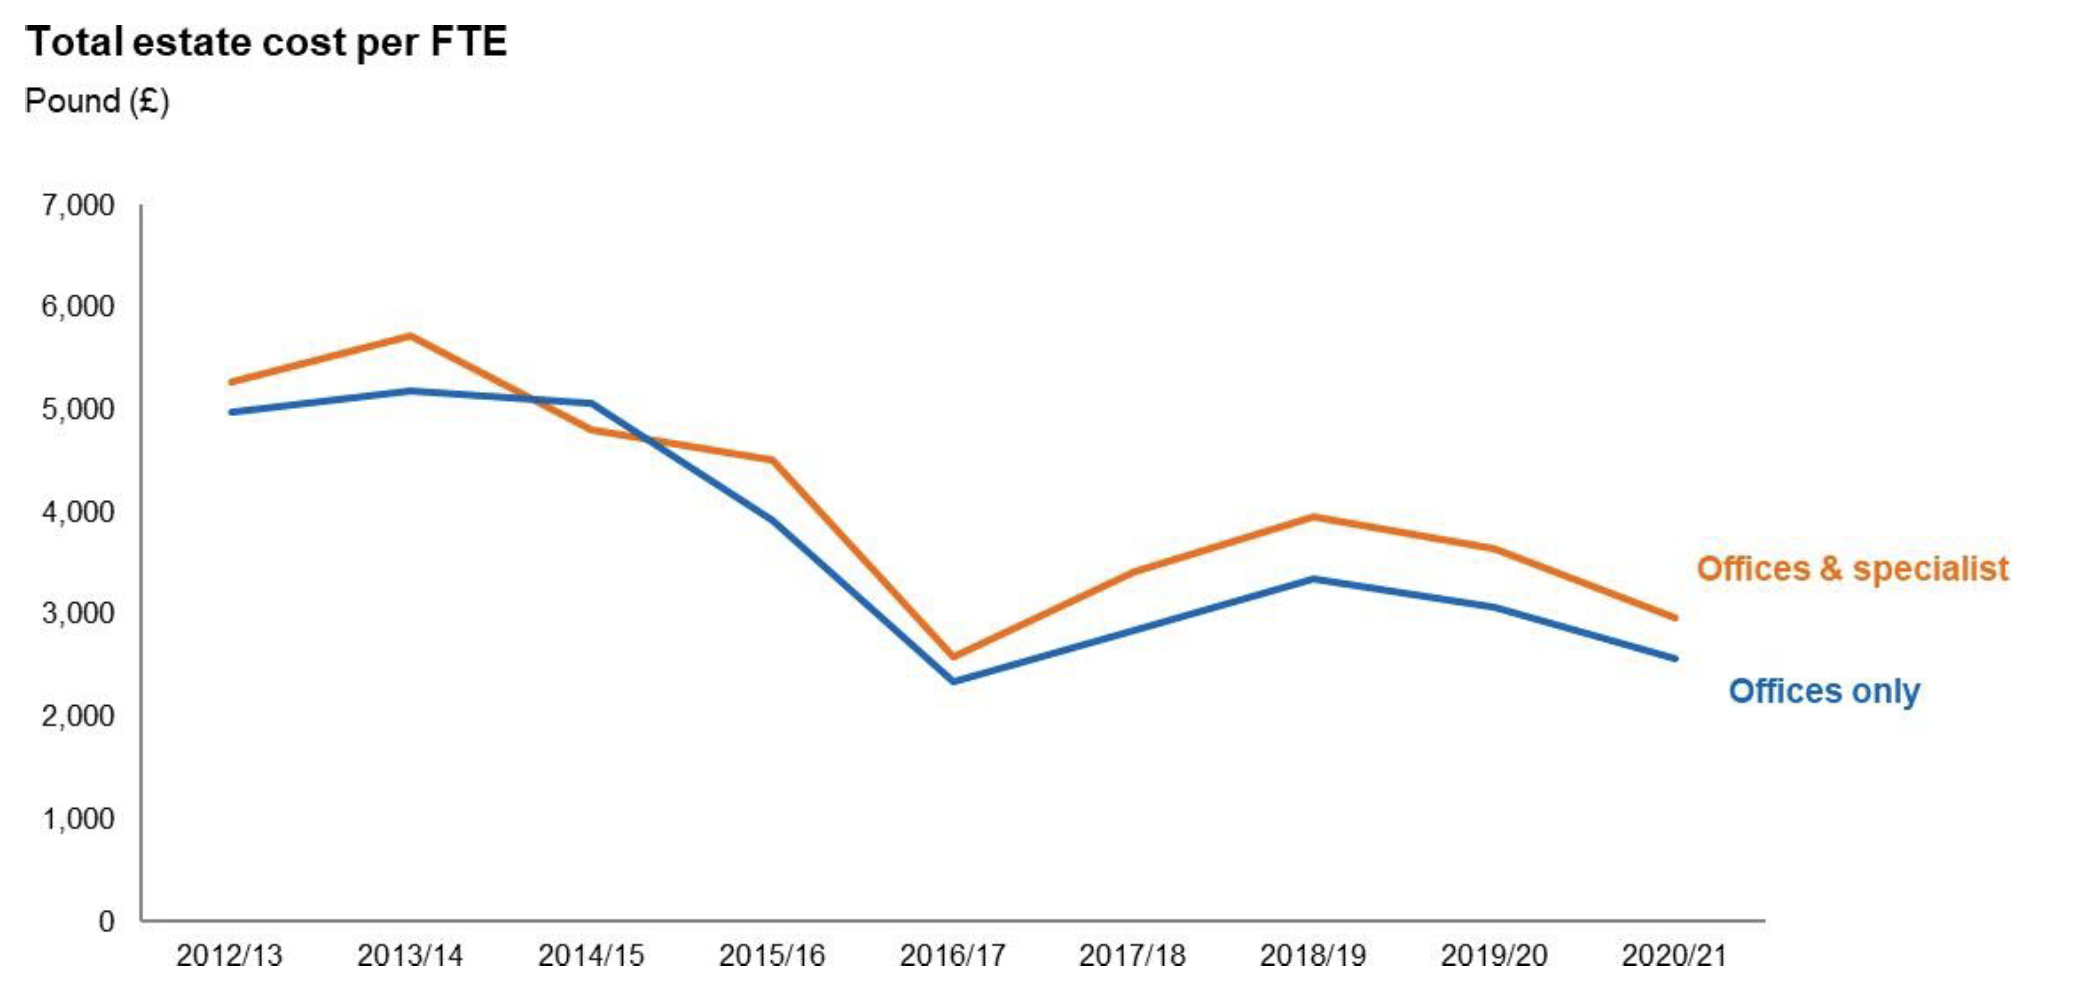 3. Total estate cost per full time equivalent (FTE) – A graph showing the total annual estate cost per FTE from 2012/13 to 2020/21. There are two lines, one line shows the office and specialist building costs which currently sits at £2,970 and the other line which shows offices only at £2,563.